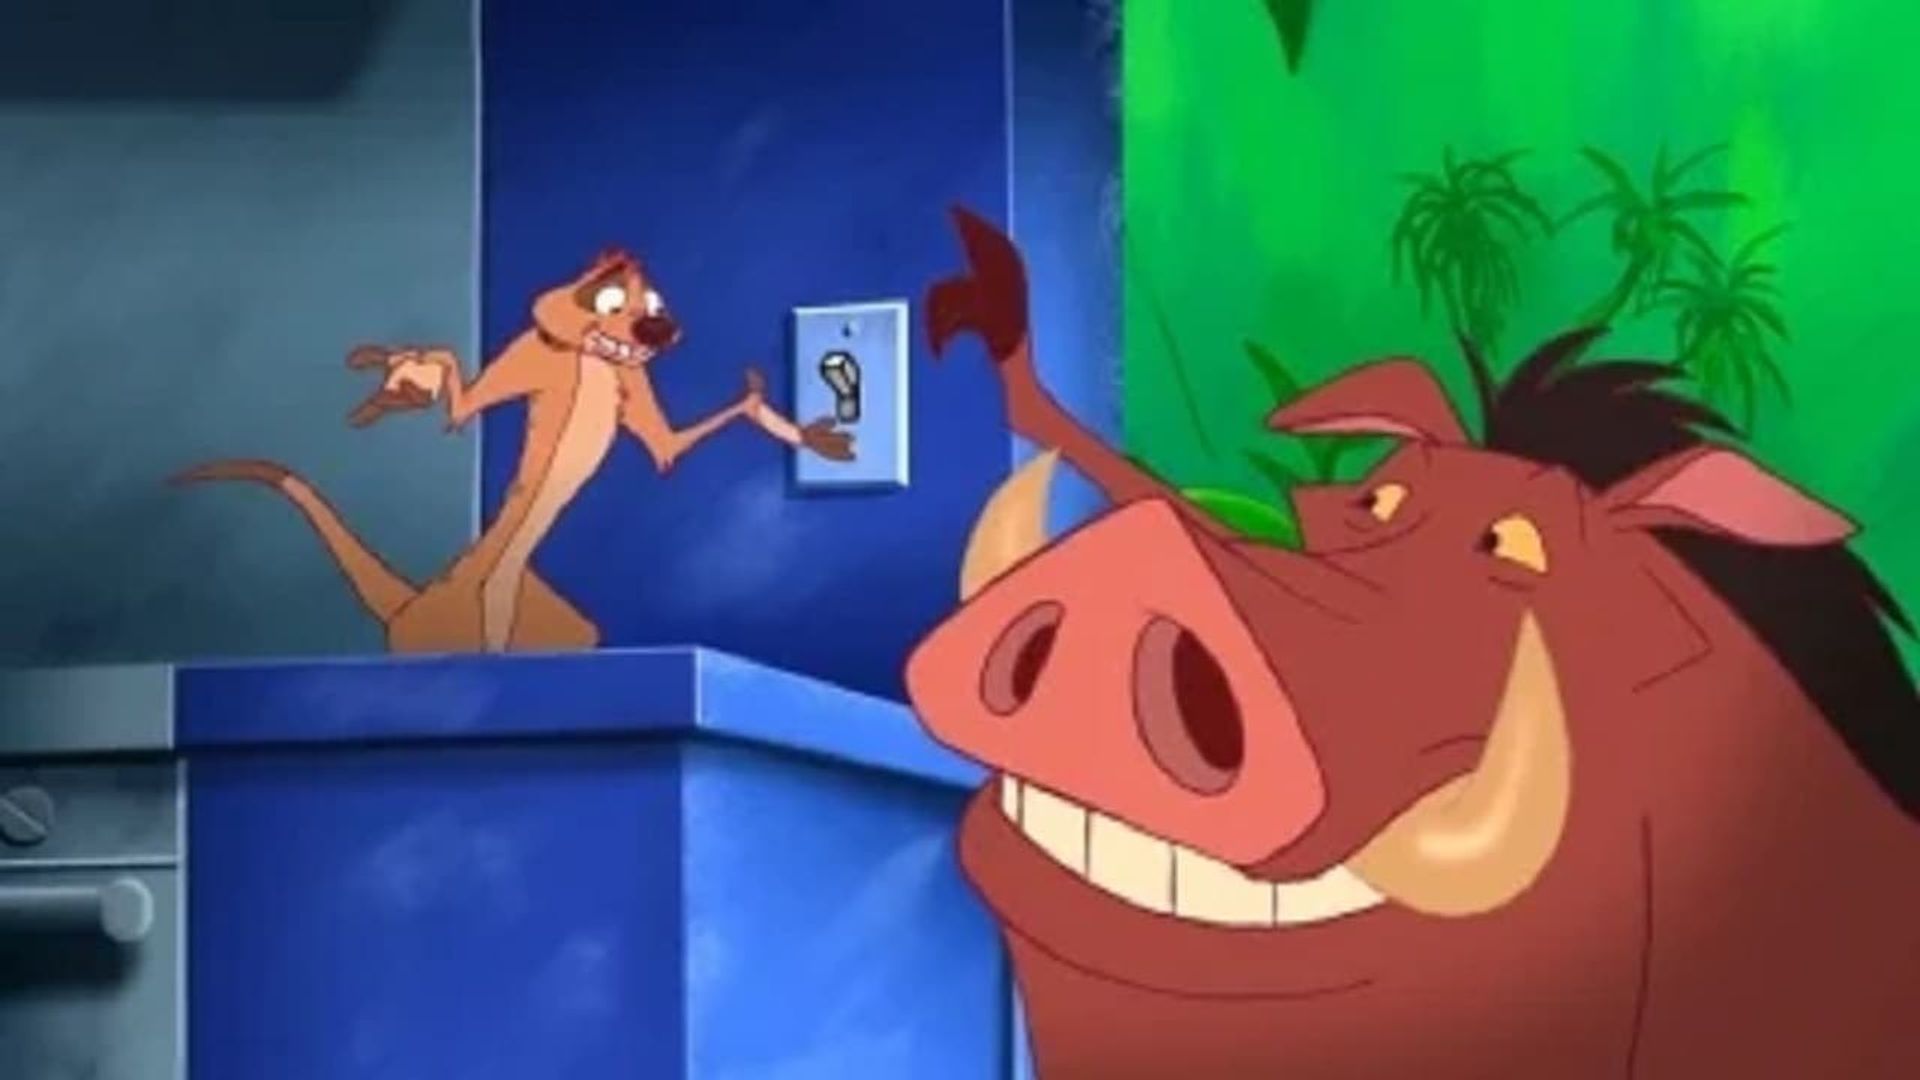 Wild About Safety: Timon and Pumbaa Safety Smart at Home! background